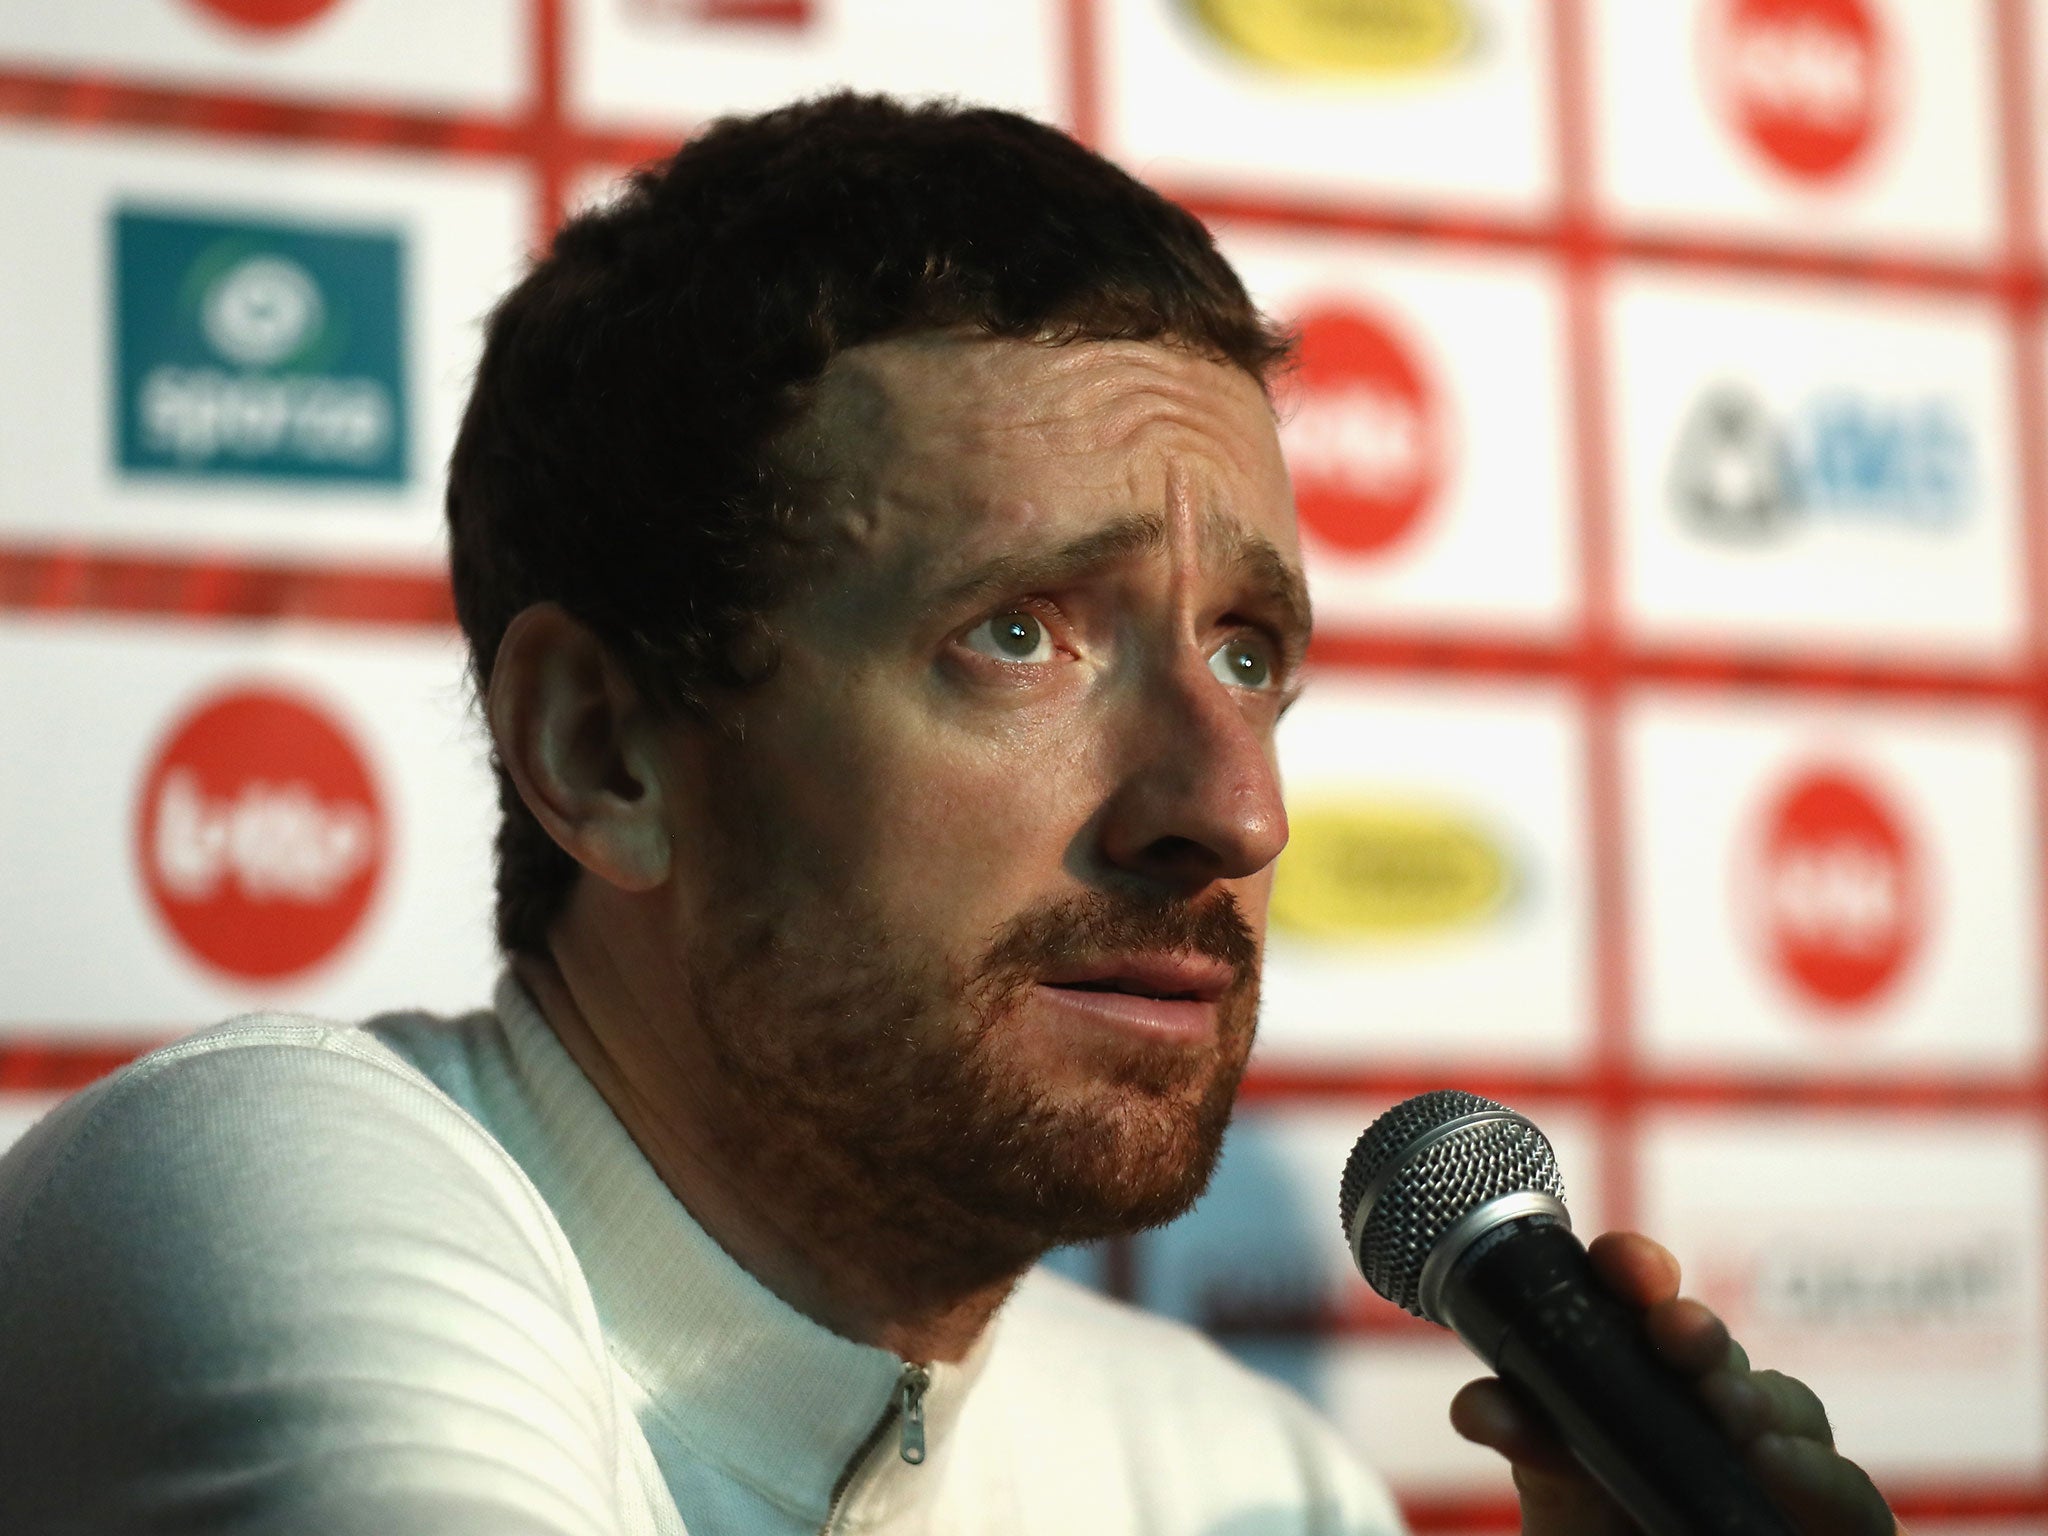 The revelation that Bradley Wiggins' medical data was not recorded has left Team Sky's reputation in tatters